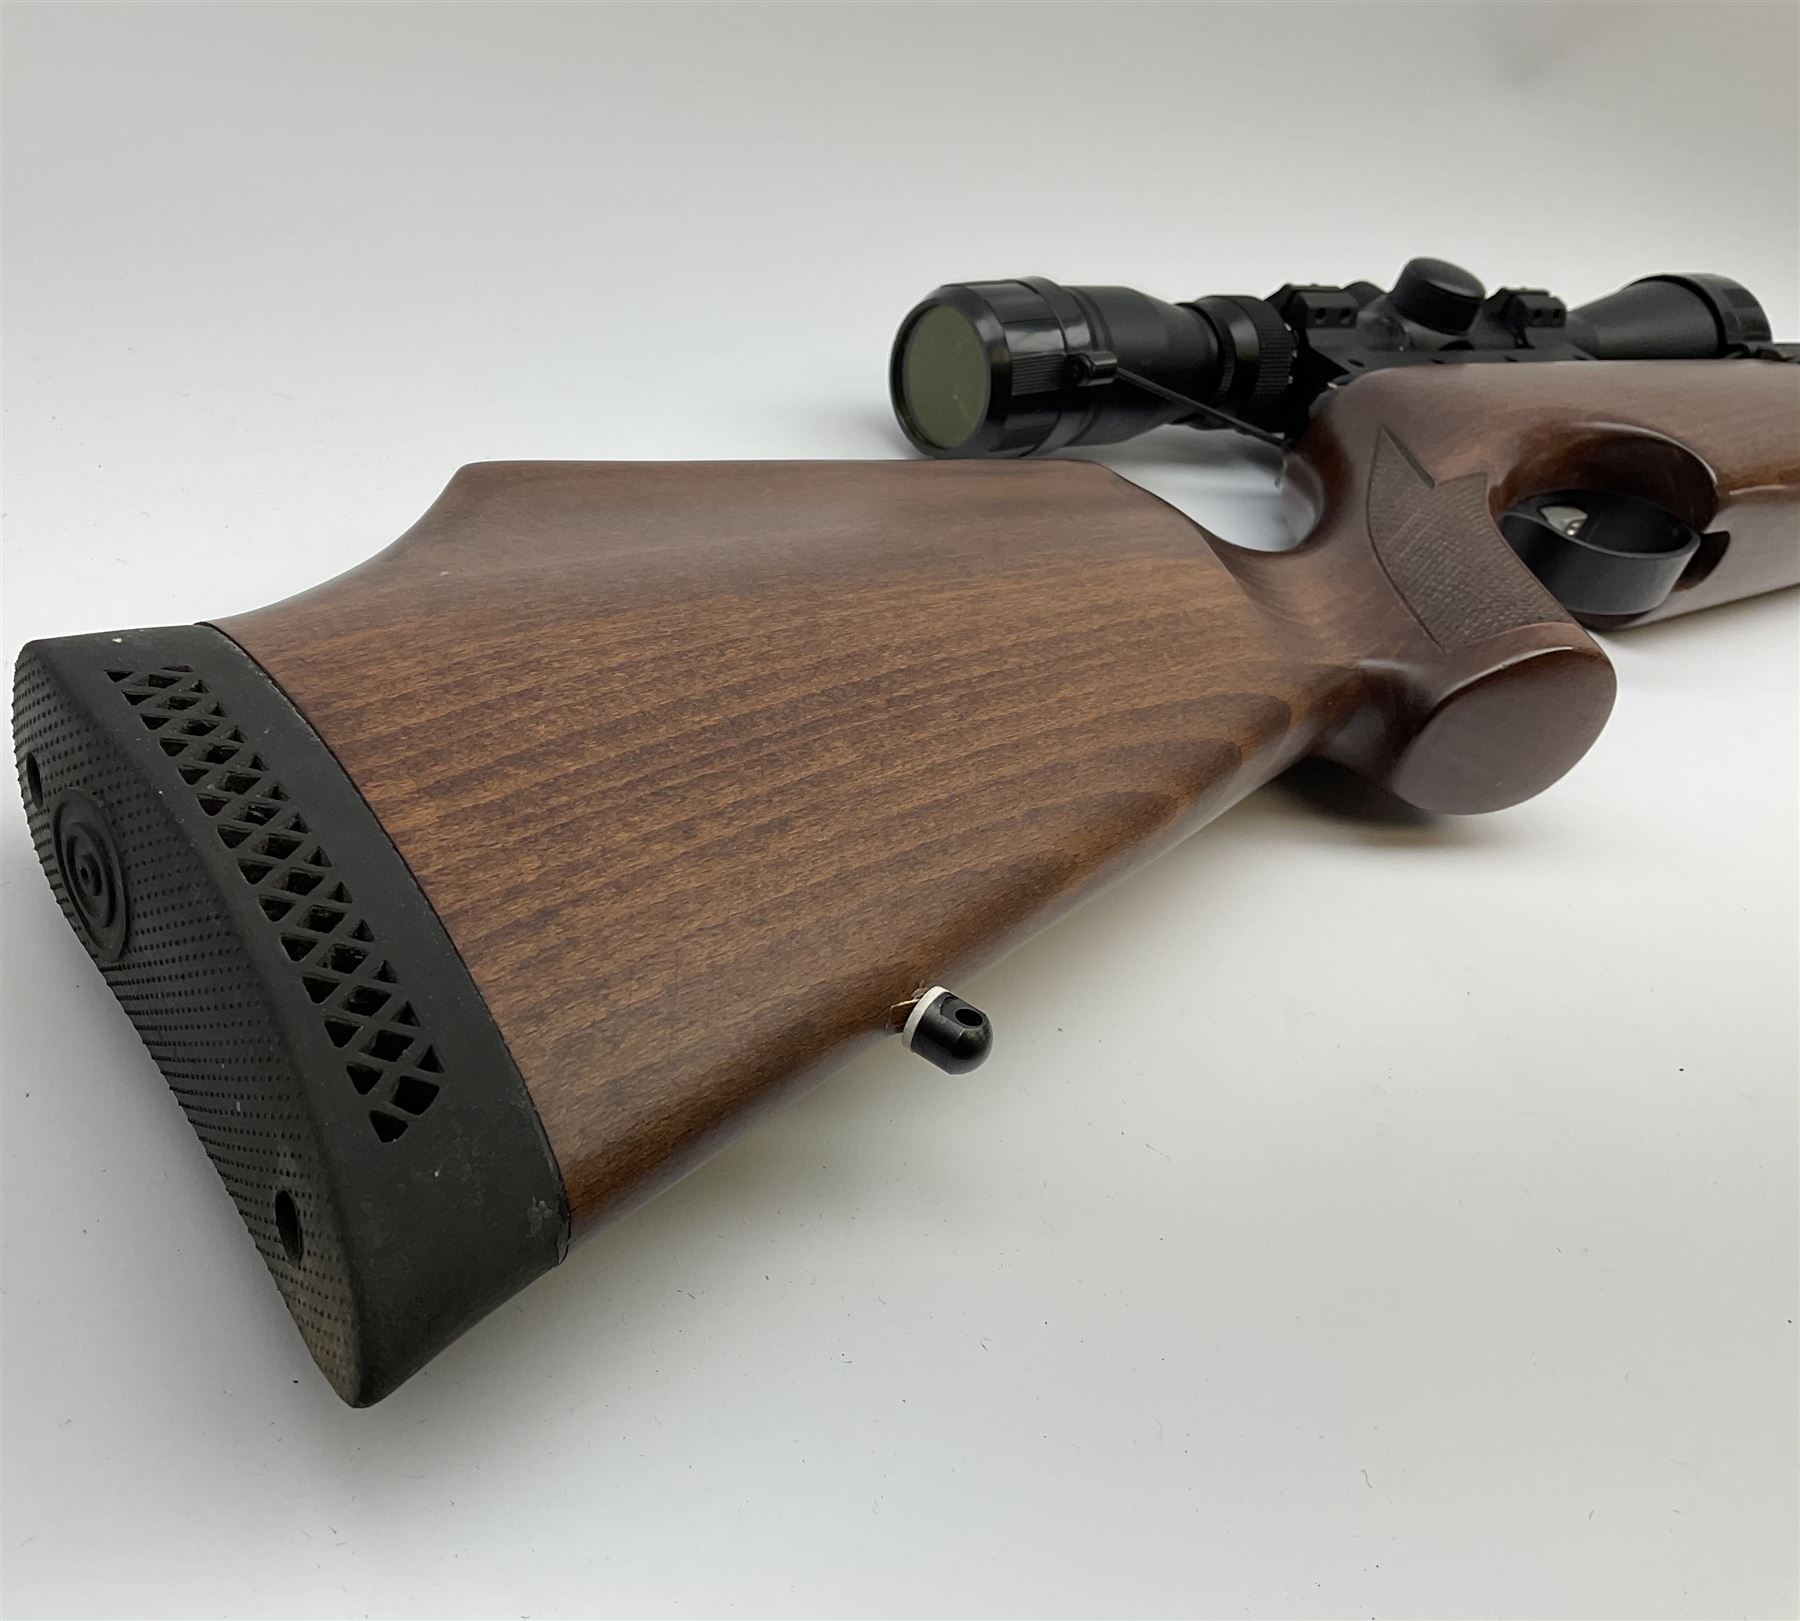 Air-Arms TX200 .22 underlever air rifle with Hawke telescopic sights - Image 5 of 13